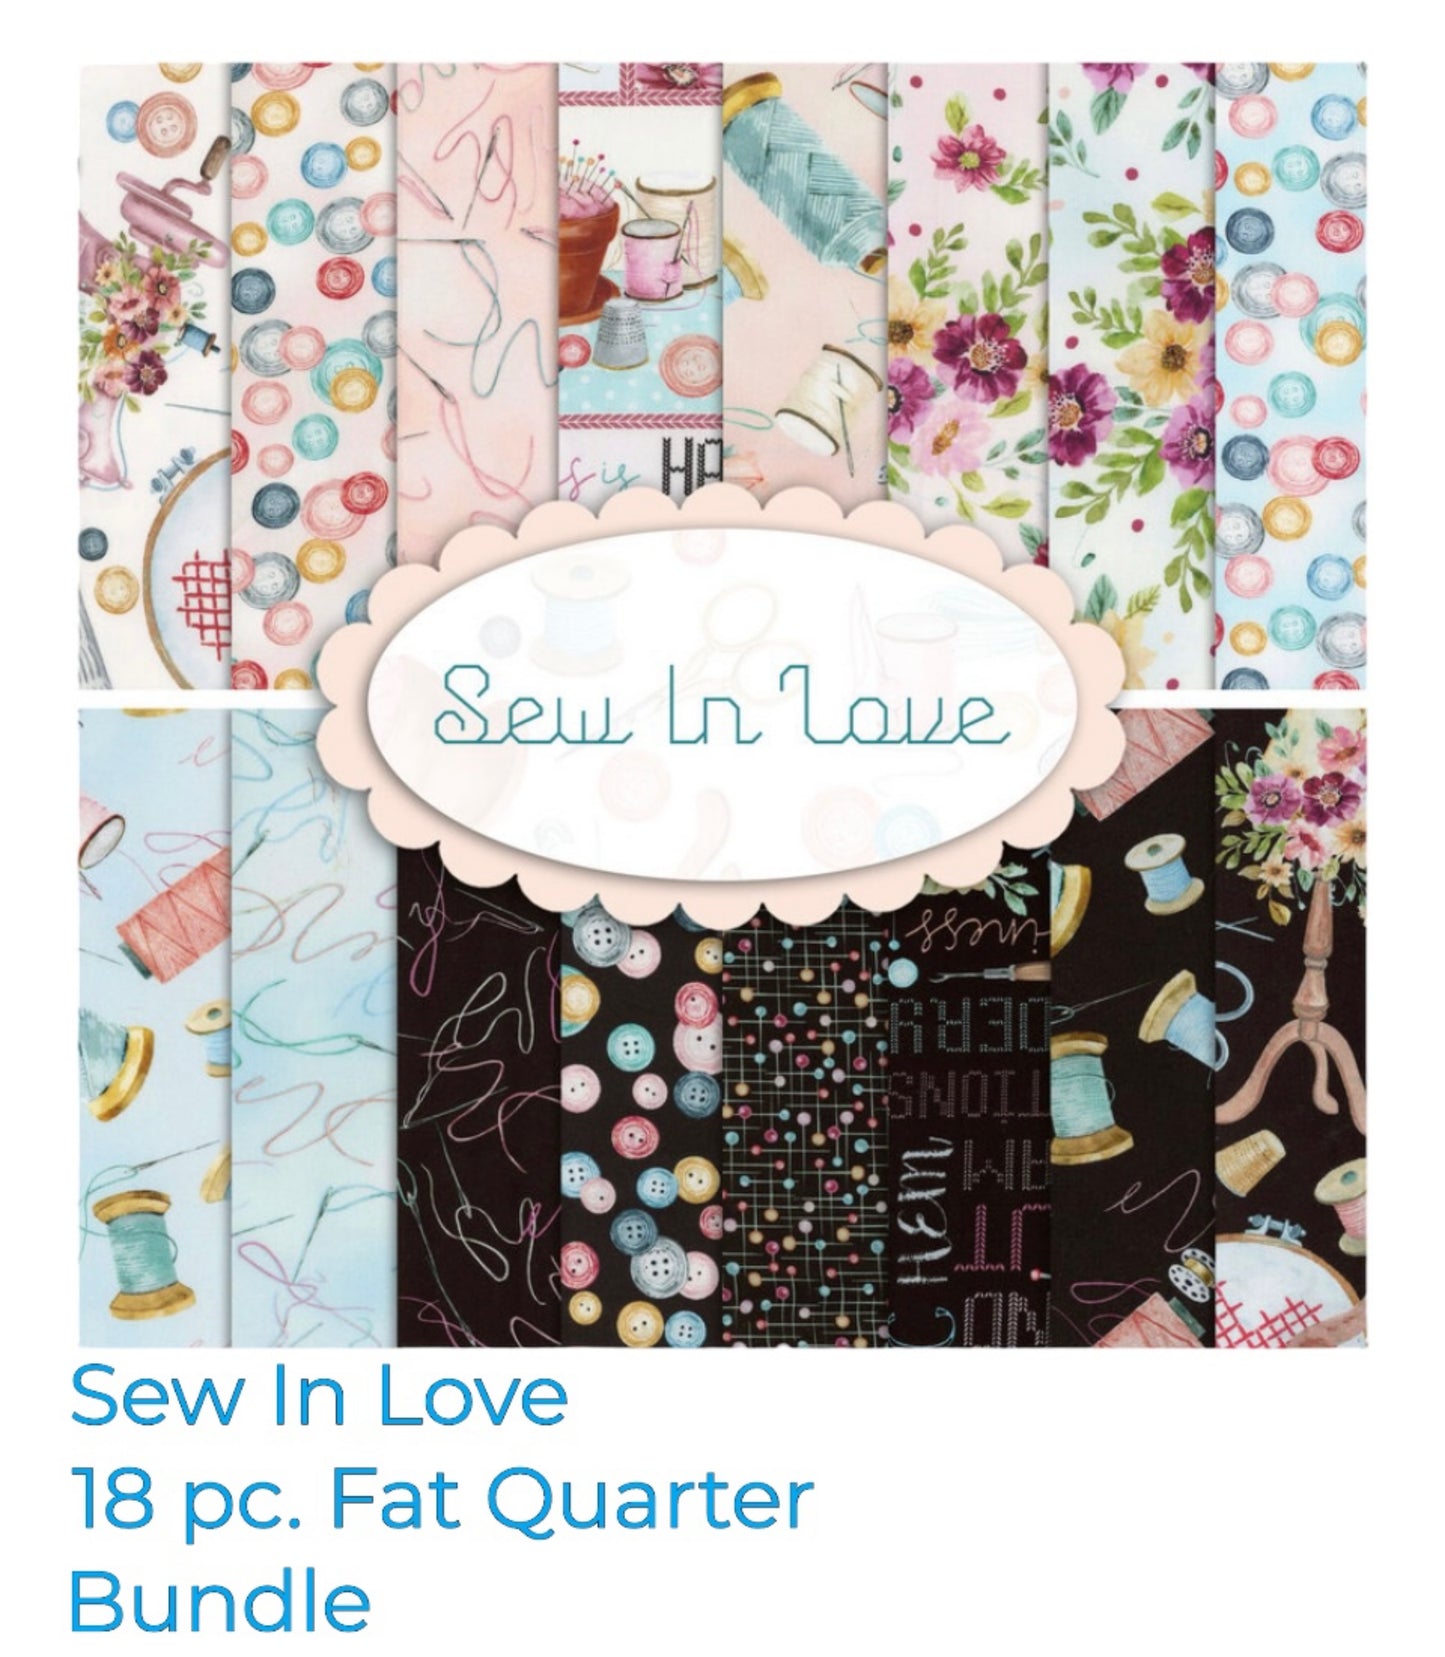 Sew In Love Fat Quarter 18 pc Bundle by Nicole Decamp for Kanvas Fabrics 